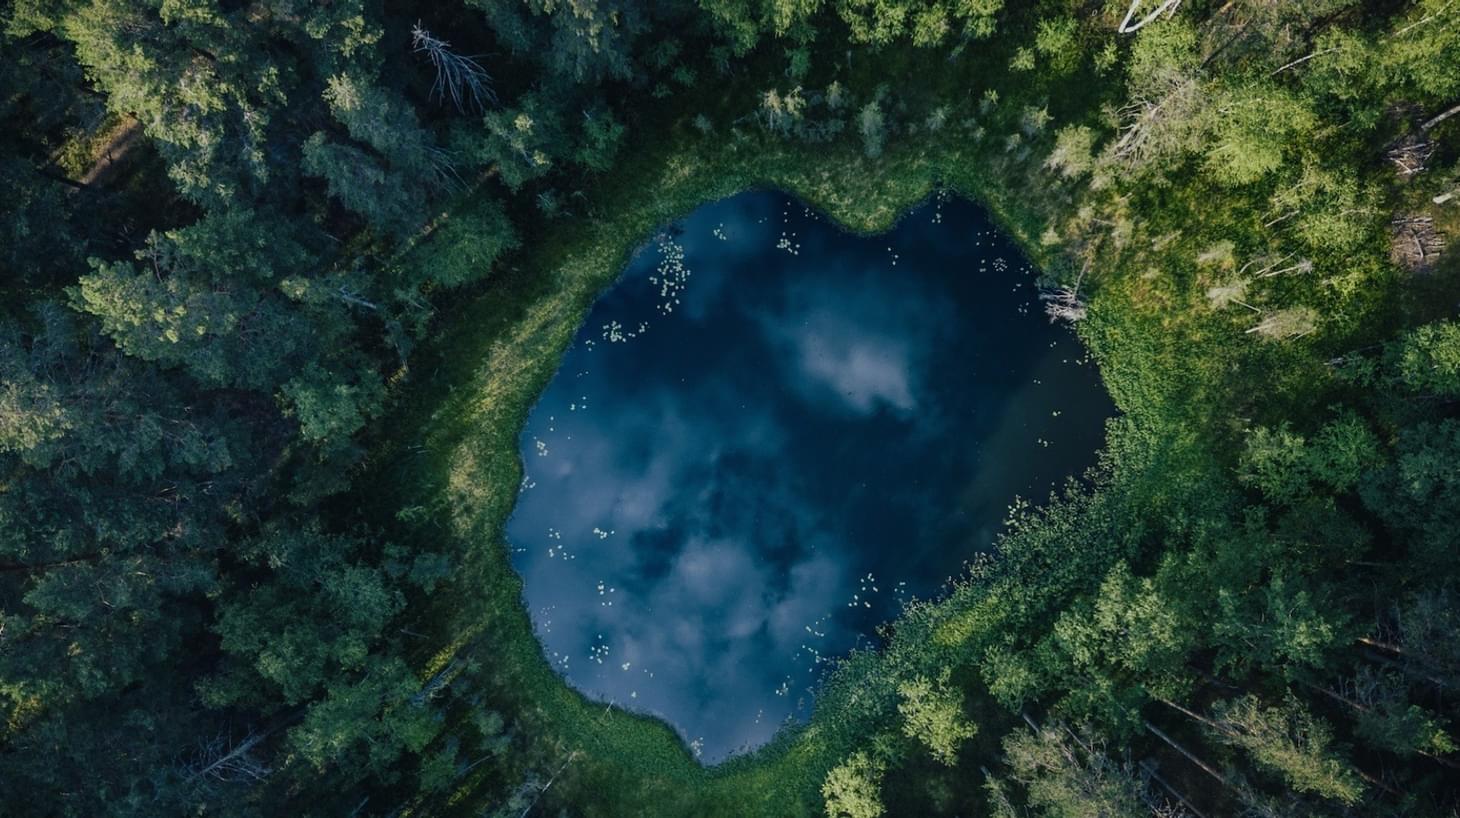 Top down shot of a crystal clear lake in the middle of a forest